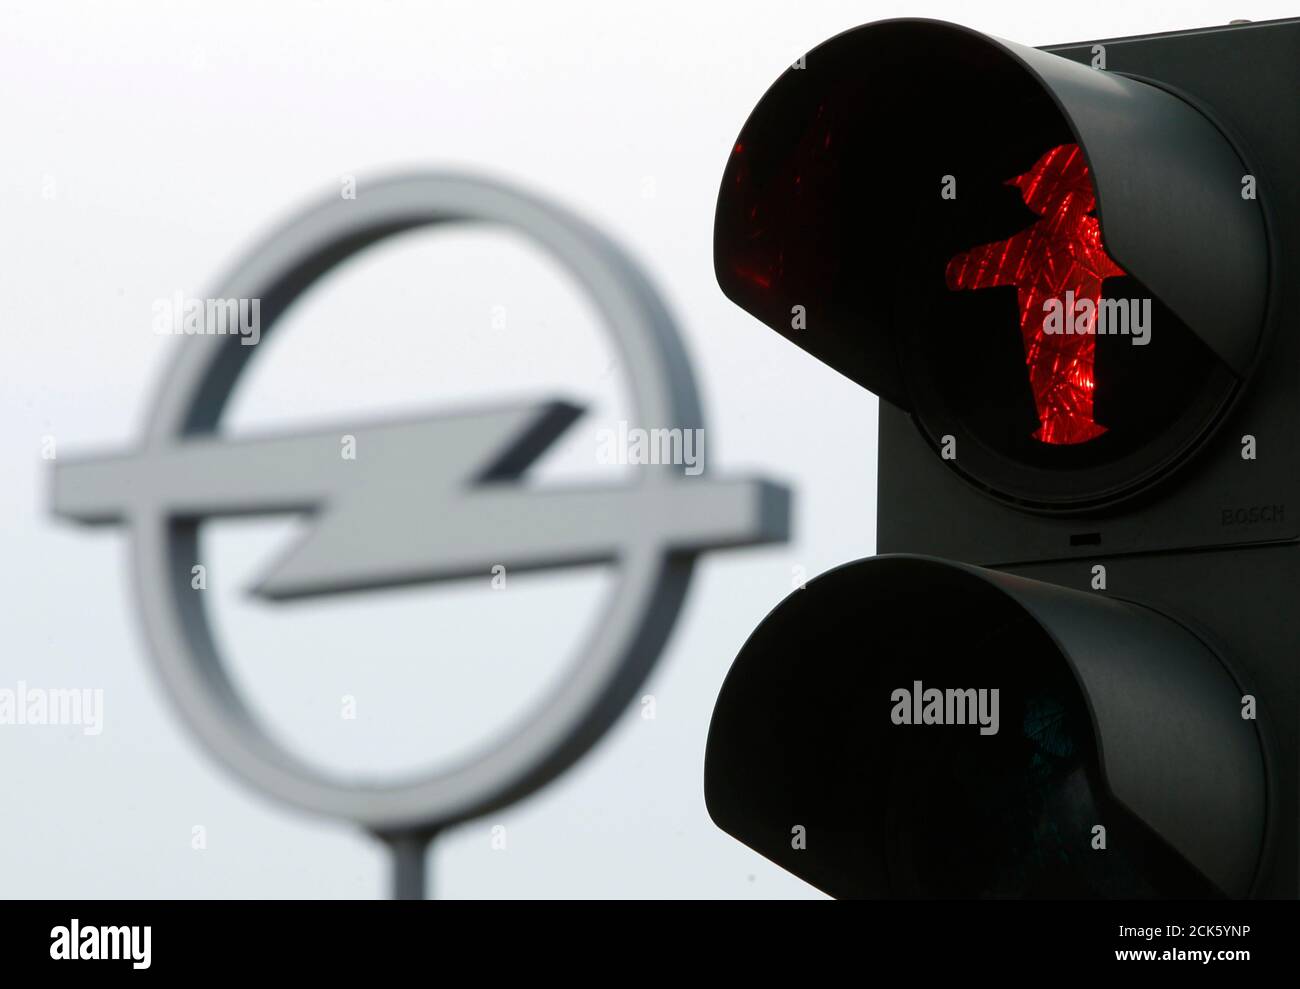 A red traffic light is seen near the logo of German car maker Opel at a automobile dealer in Berlin, June 9, 2010.  Germany's Economy Minister Rainer Bruederle said on Wednesday he had rejected a bid by carmaker General Motors for state aid for its European unit Opel. REUTERS/Thomas Peter  (GERMANY - Tags: POLITICS BUSINESS TRANSPORT IMAGES OF THE DAY) Stock Photo